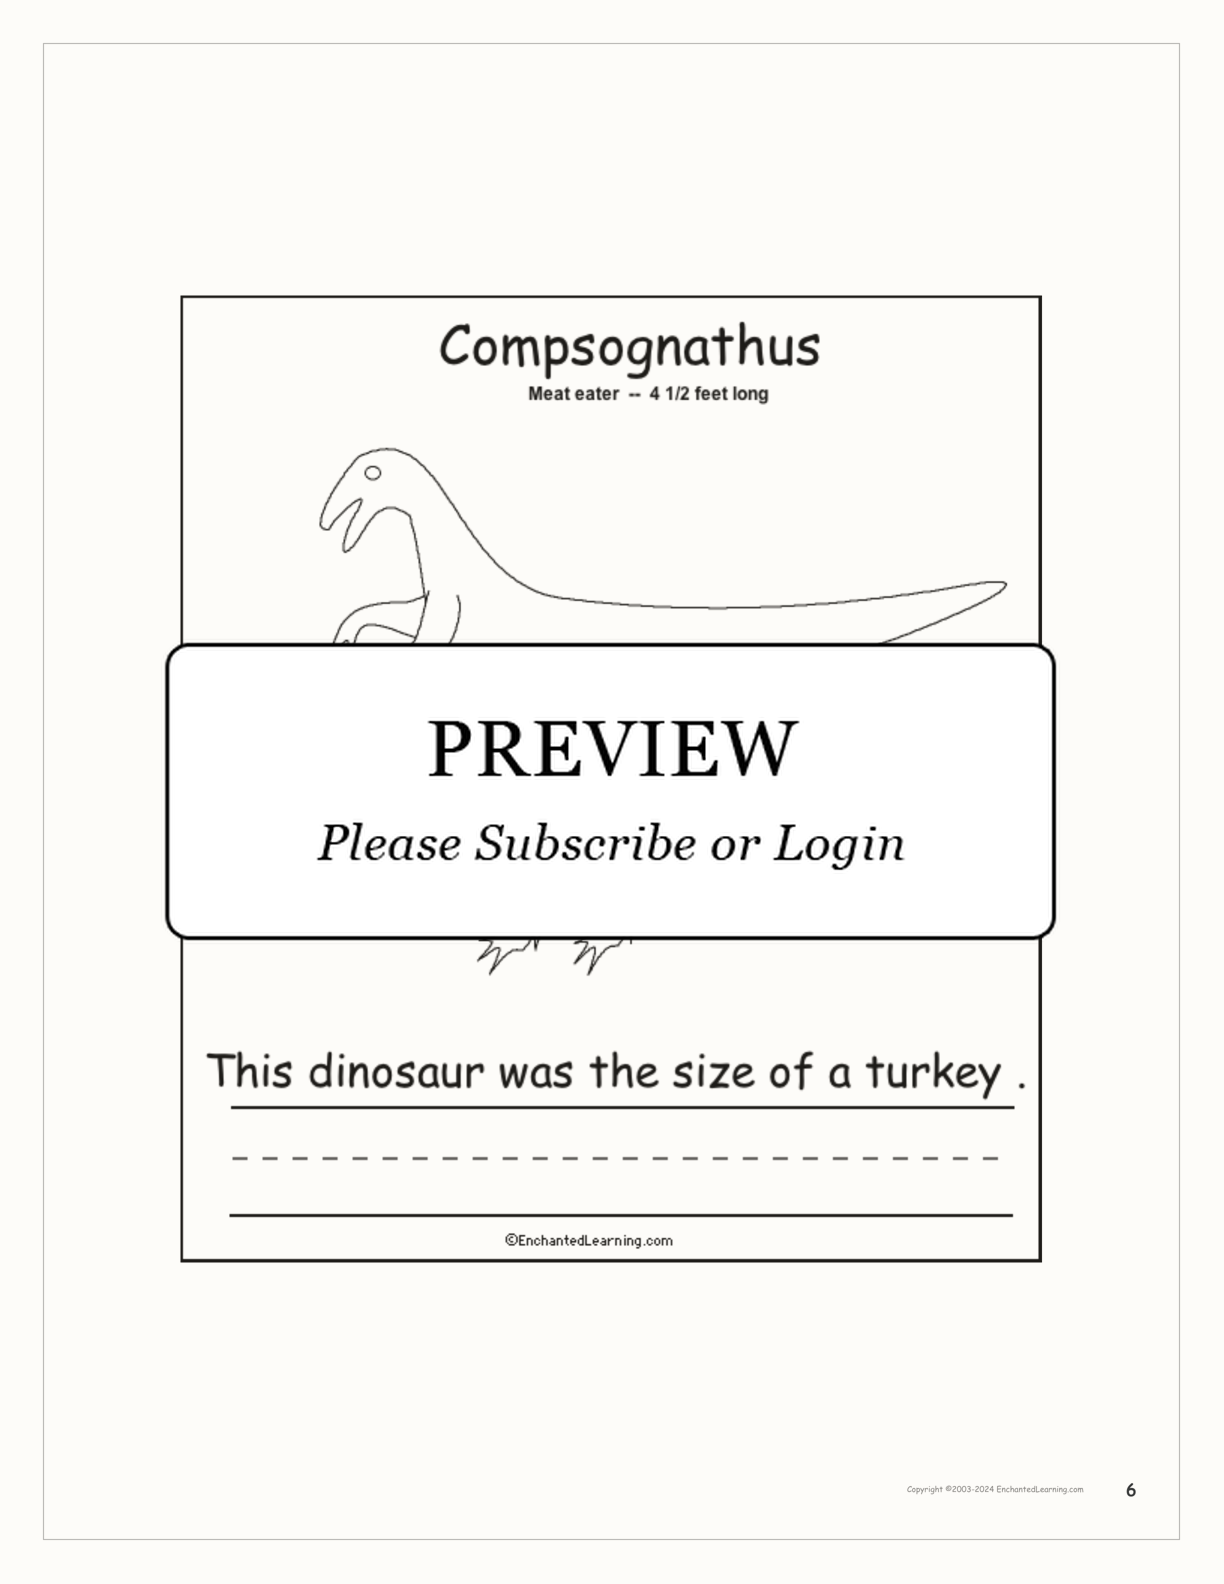 This Dinosaur... Early Reader Book interactive printout page 6